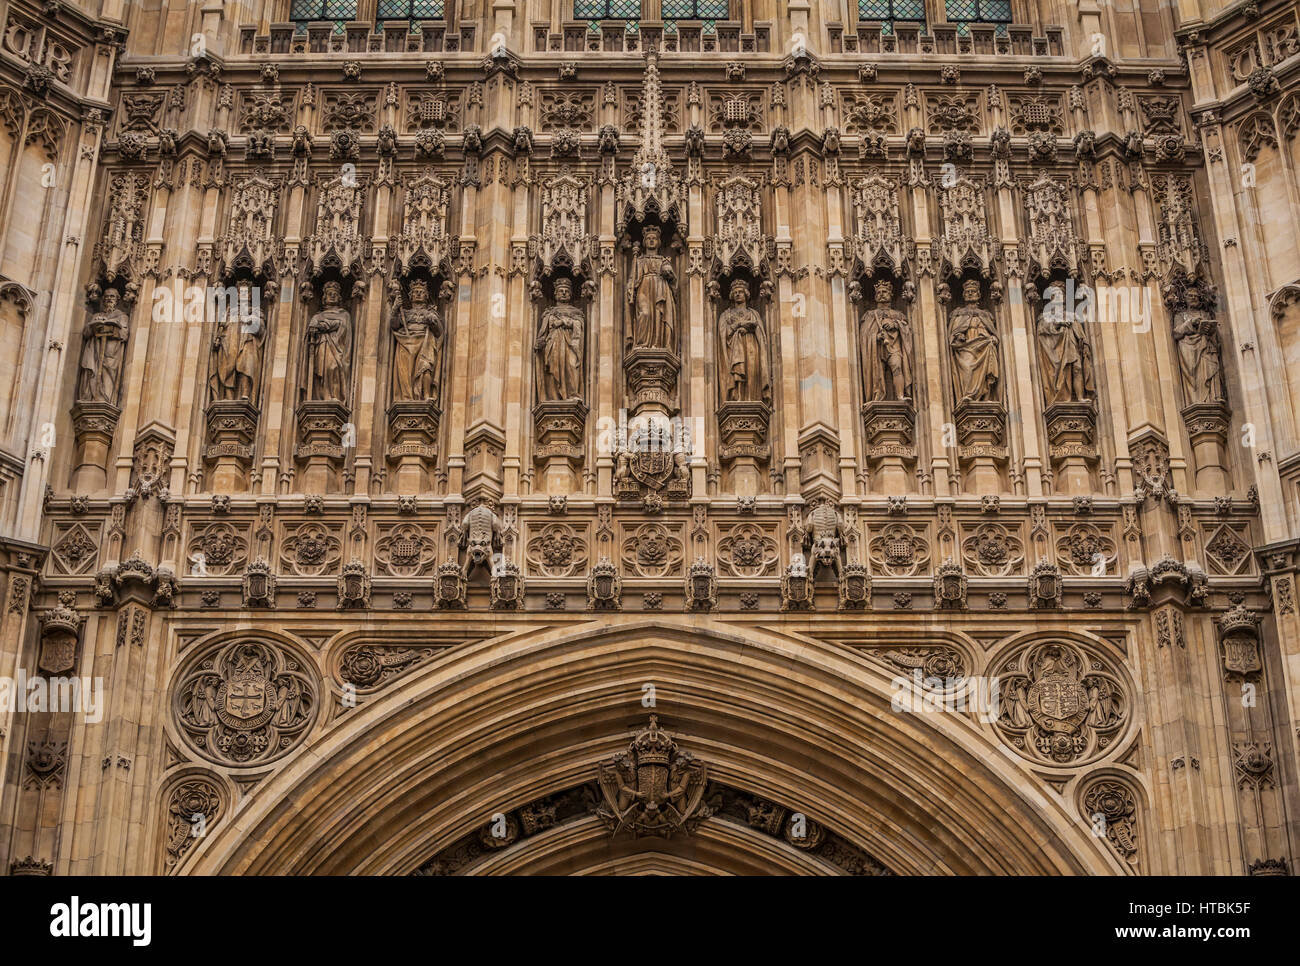 A detailed closeup view of the details above the main entrance to the Victoria Tower on Westminster Palace, London, England, United Kingdom. Stock Photo